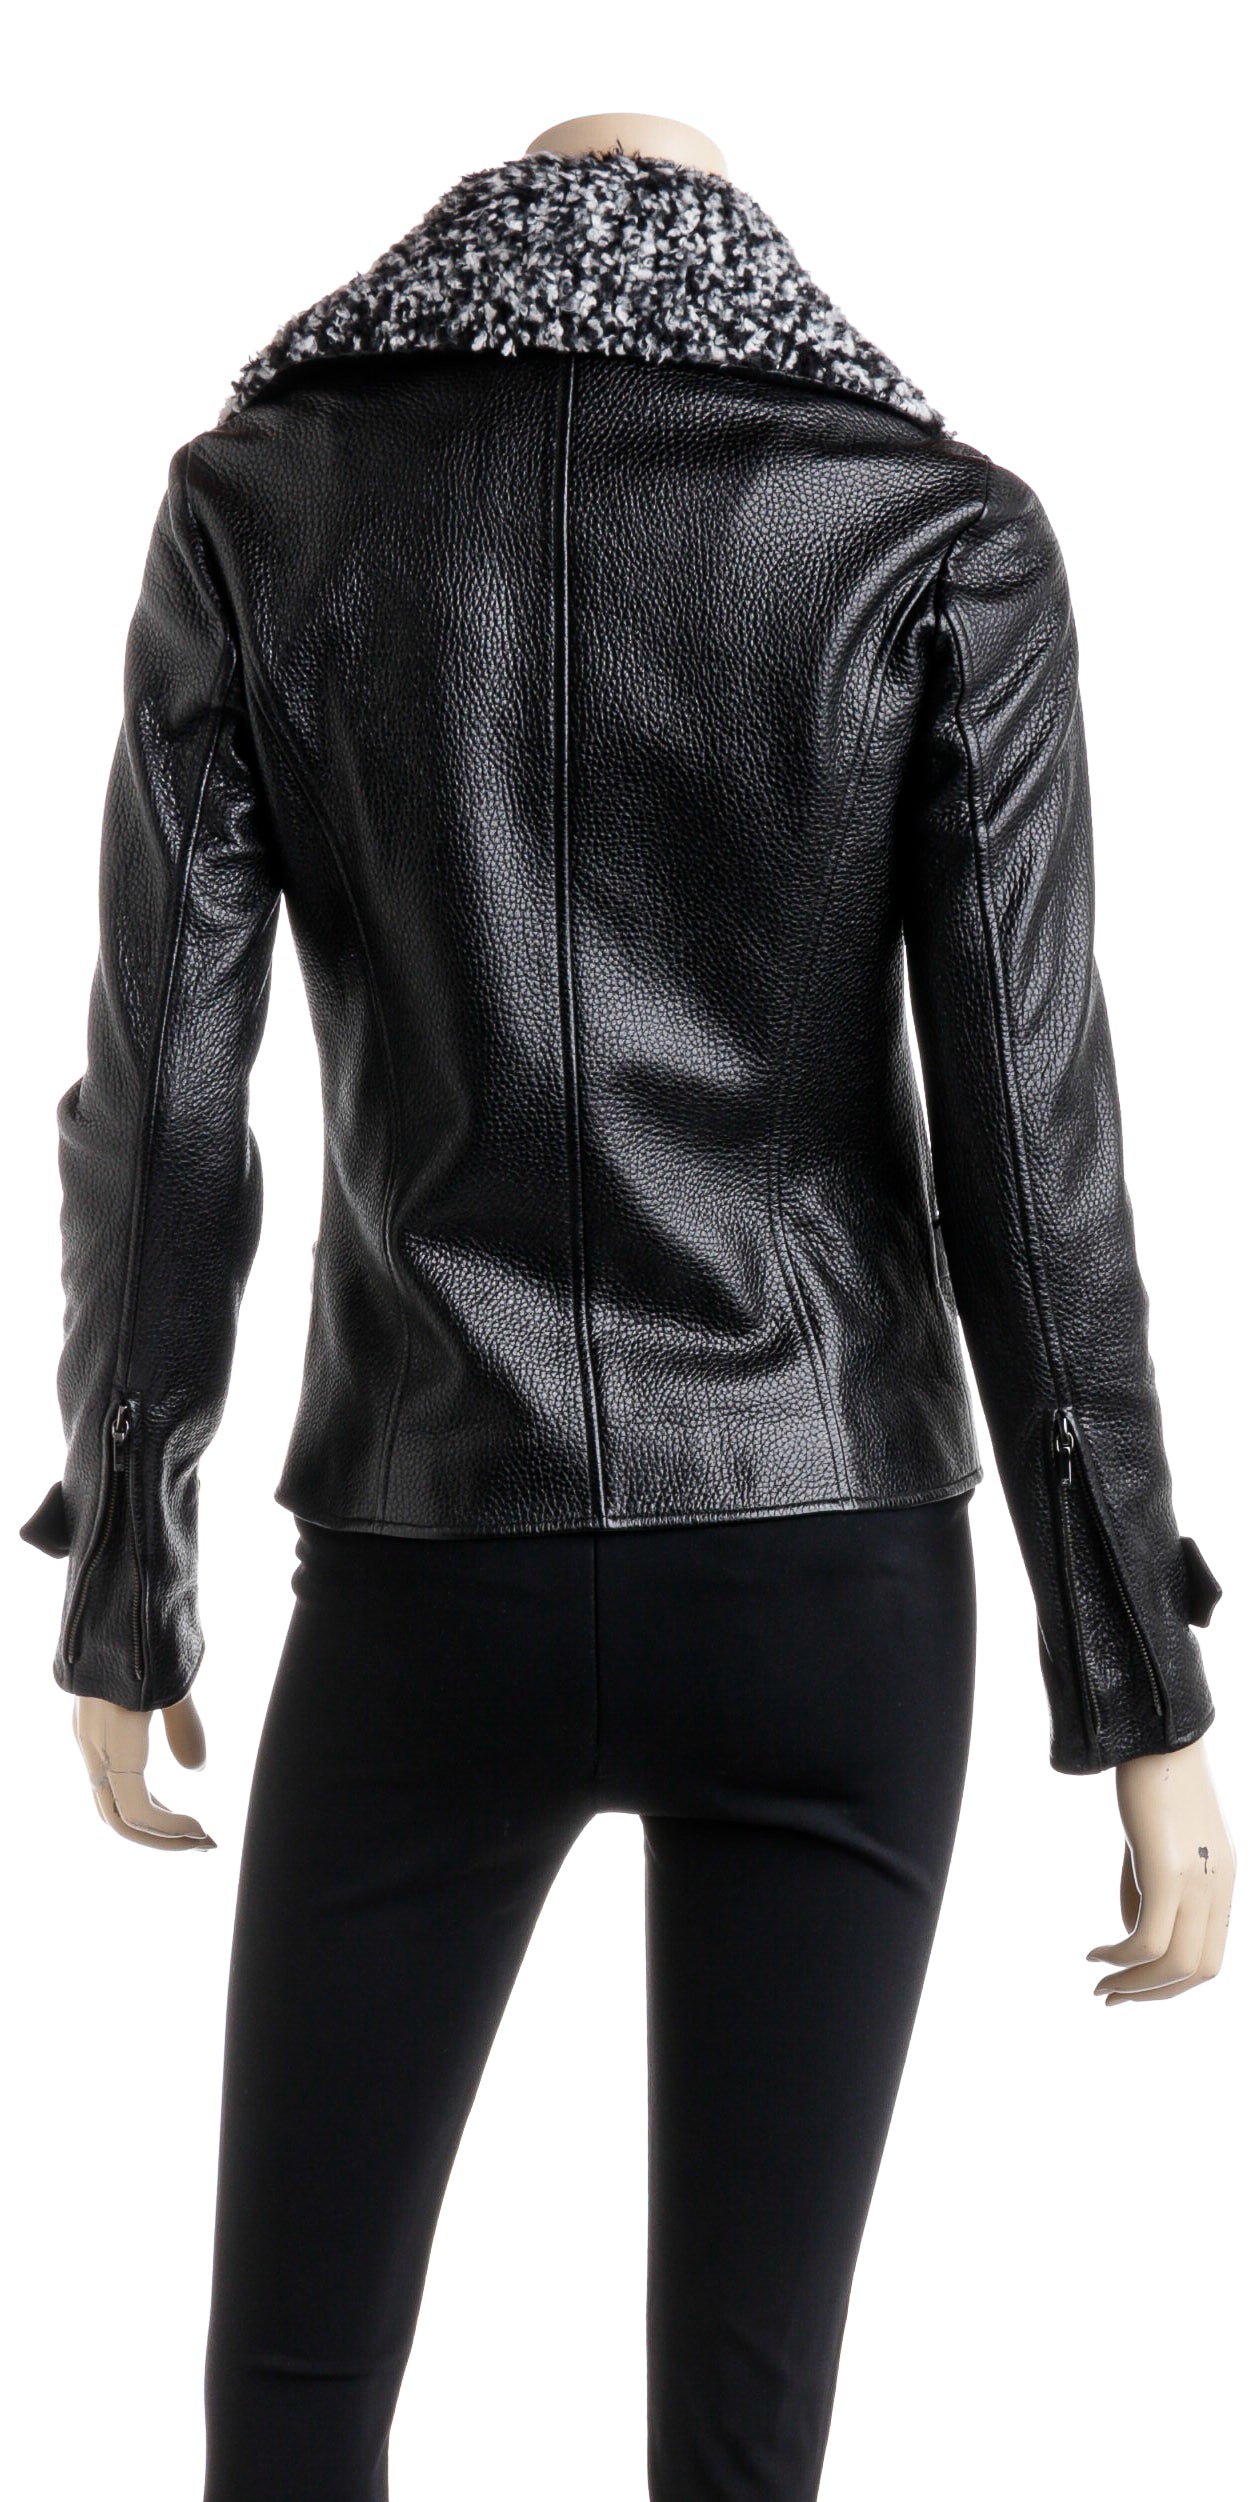 Chanel Black Leather Motorcycle Style Jacket with Boucle Collar Size 36